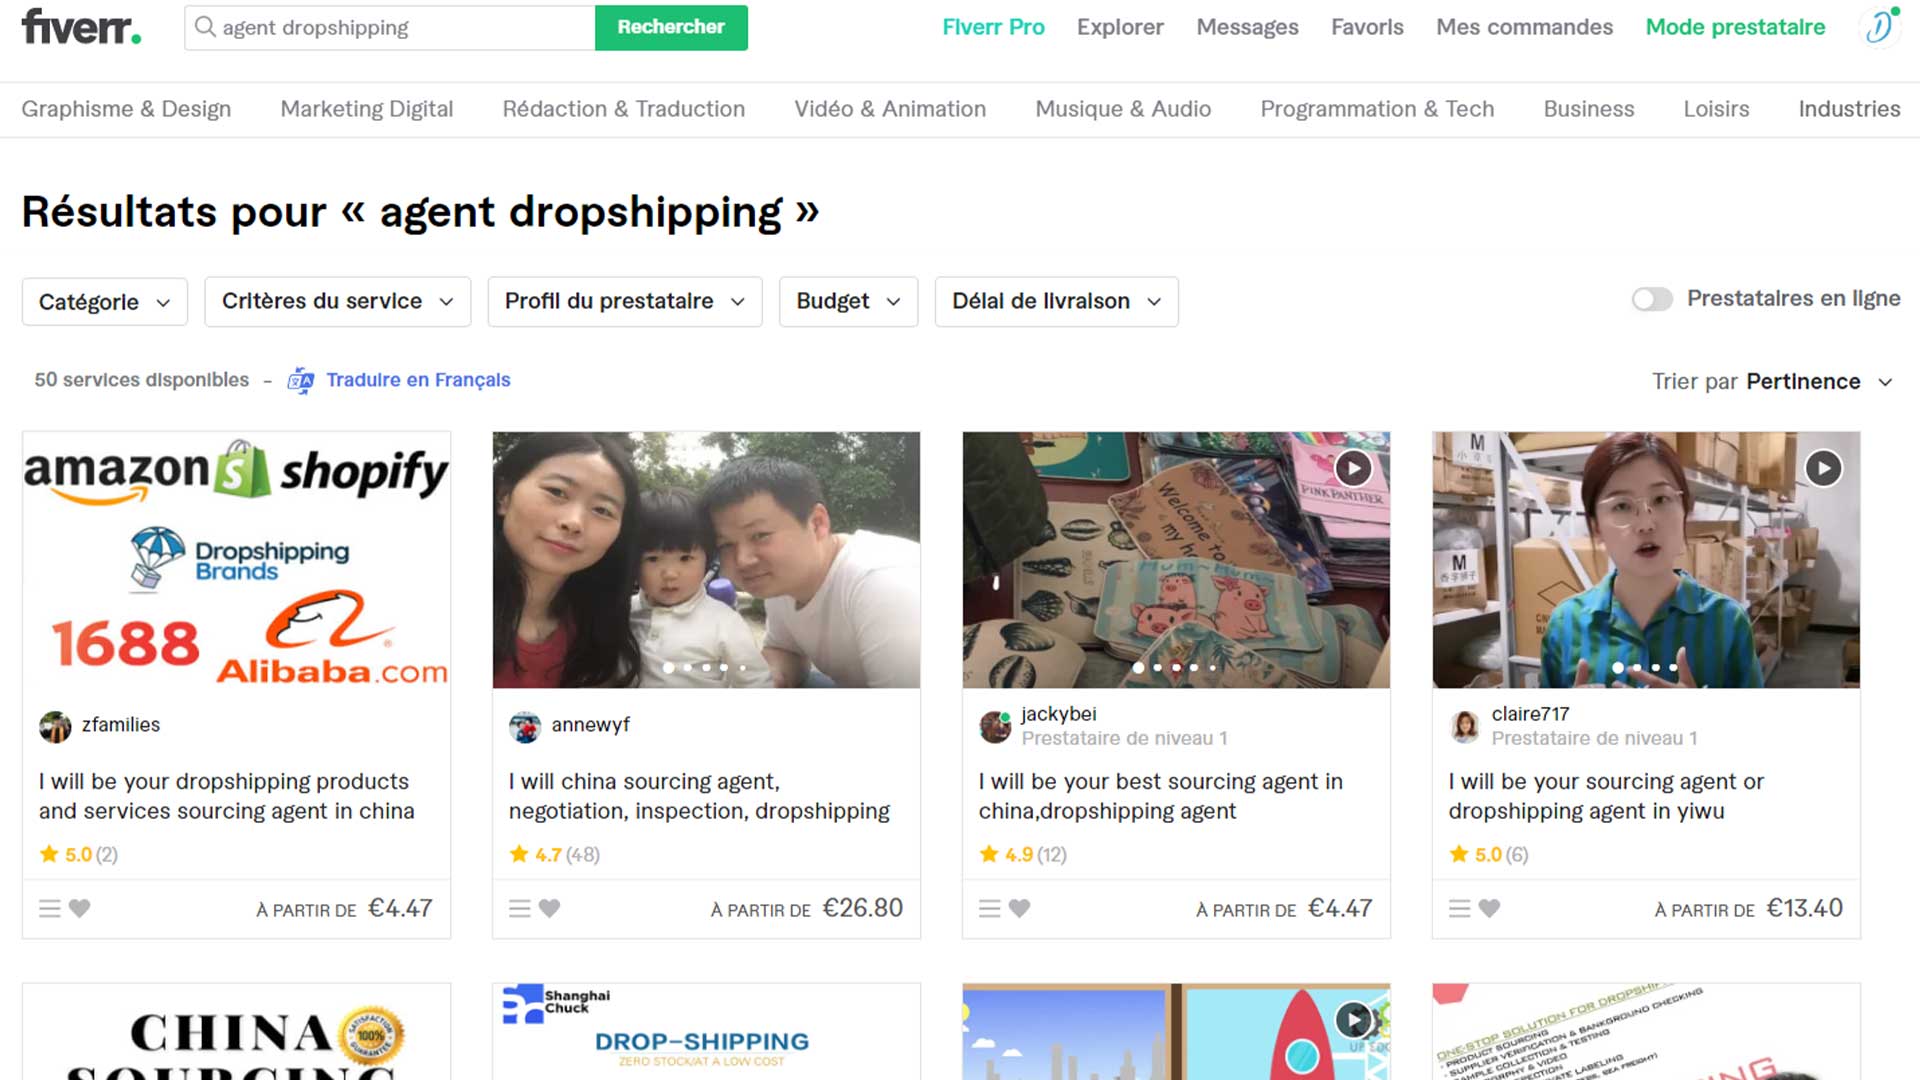 Agent dropshipping fiverr